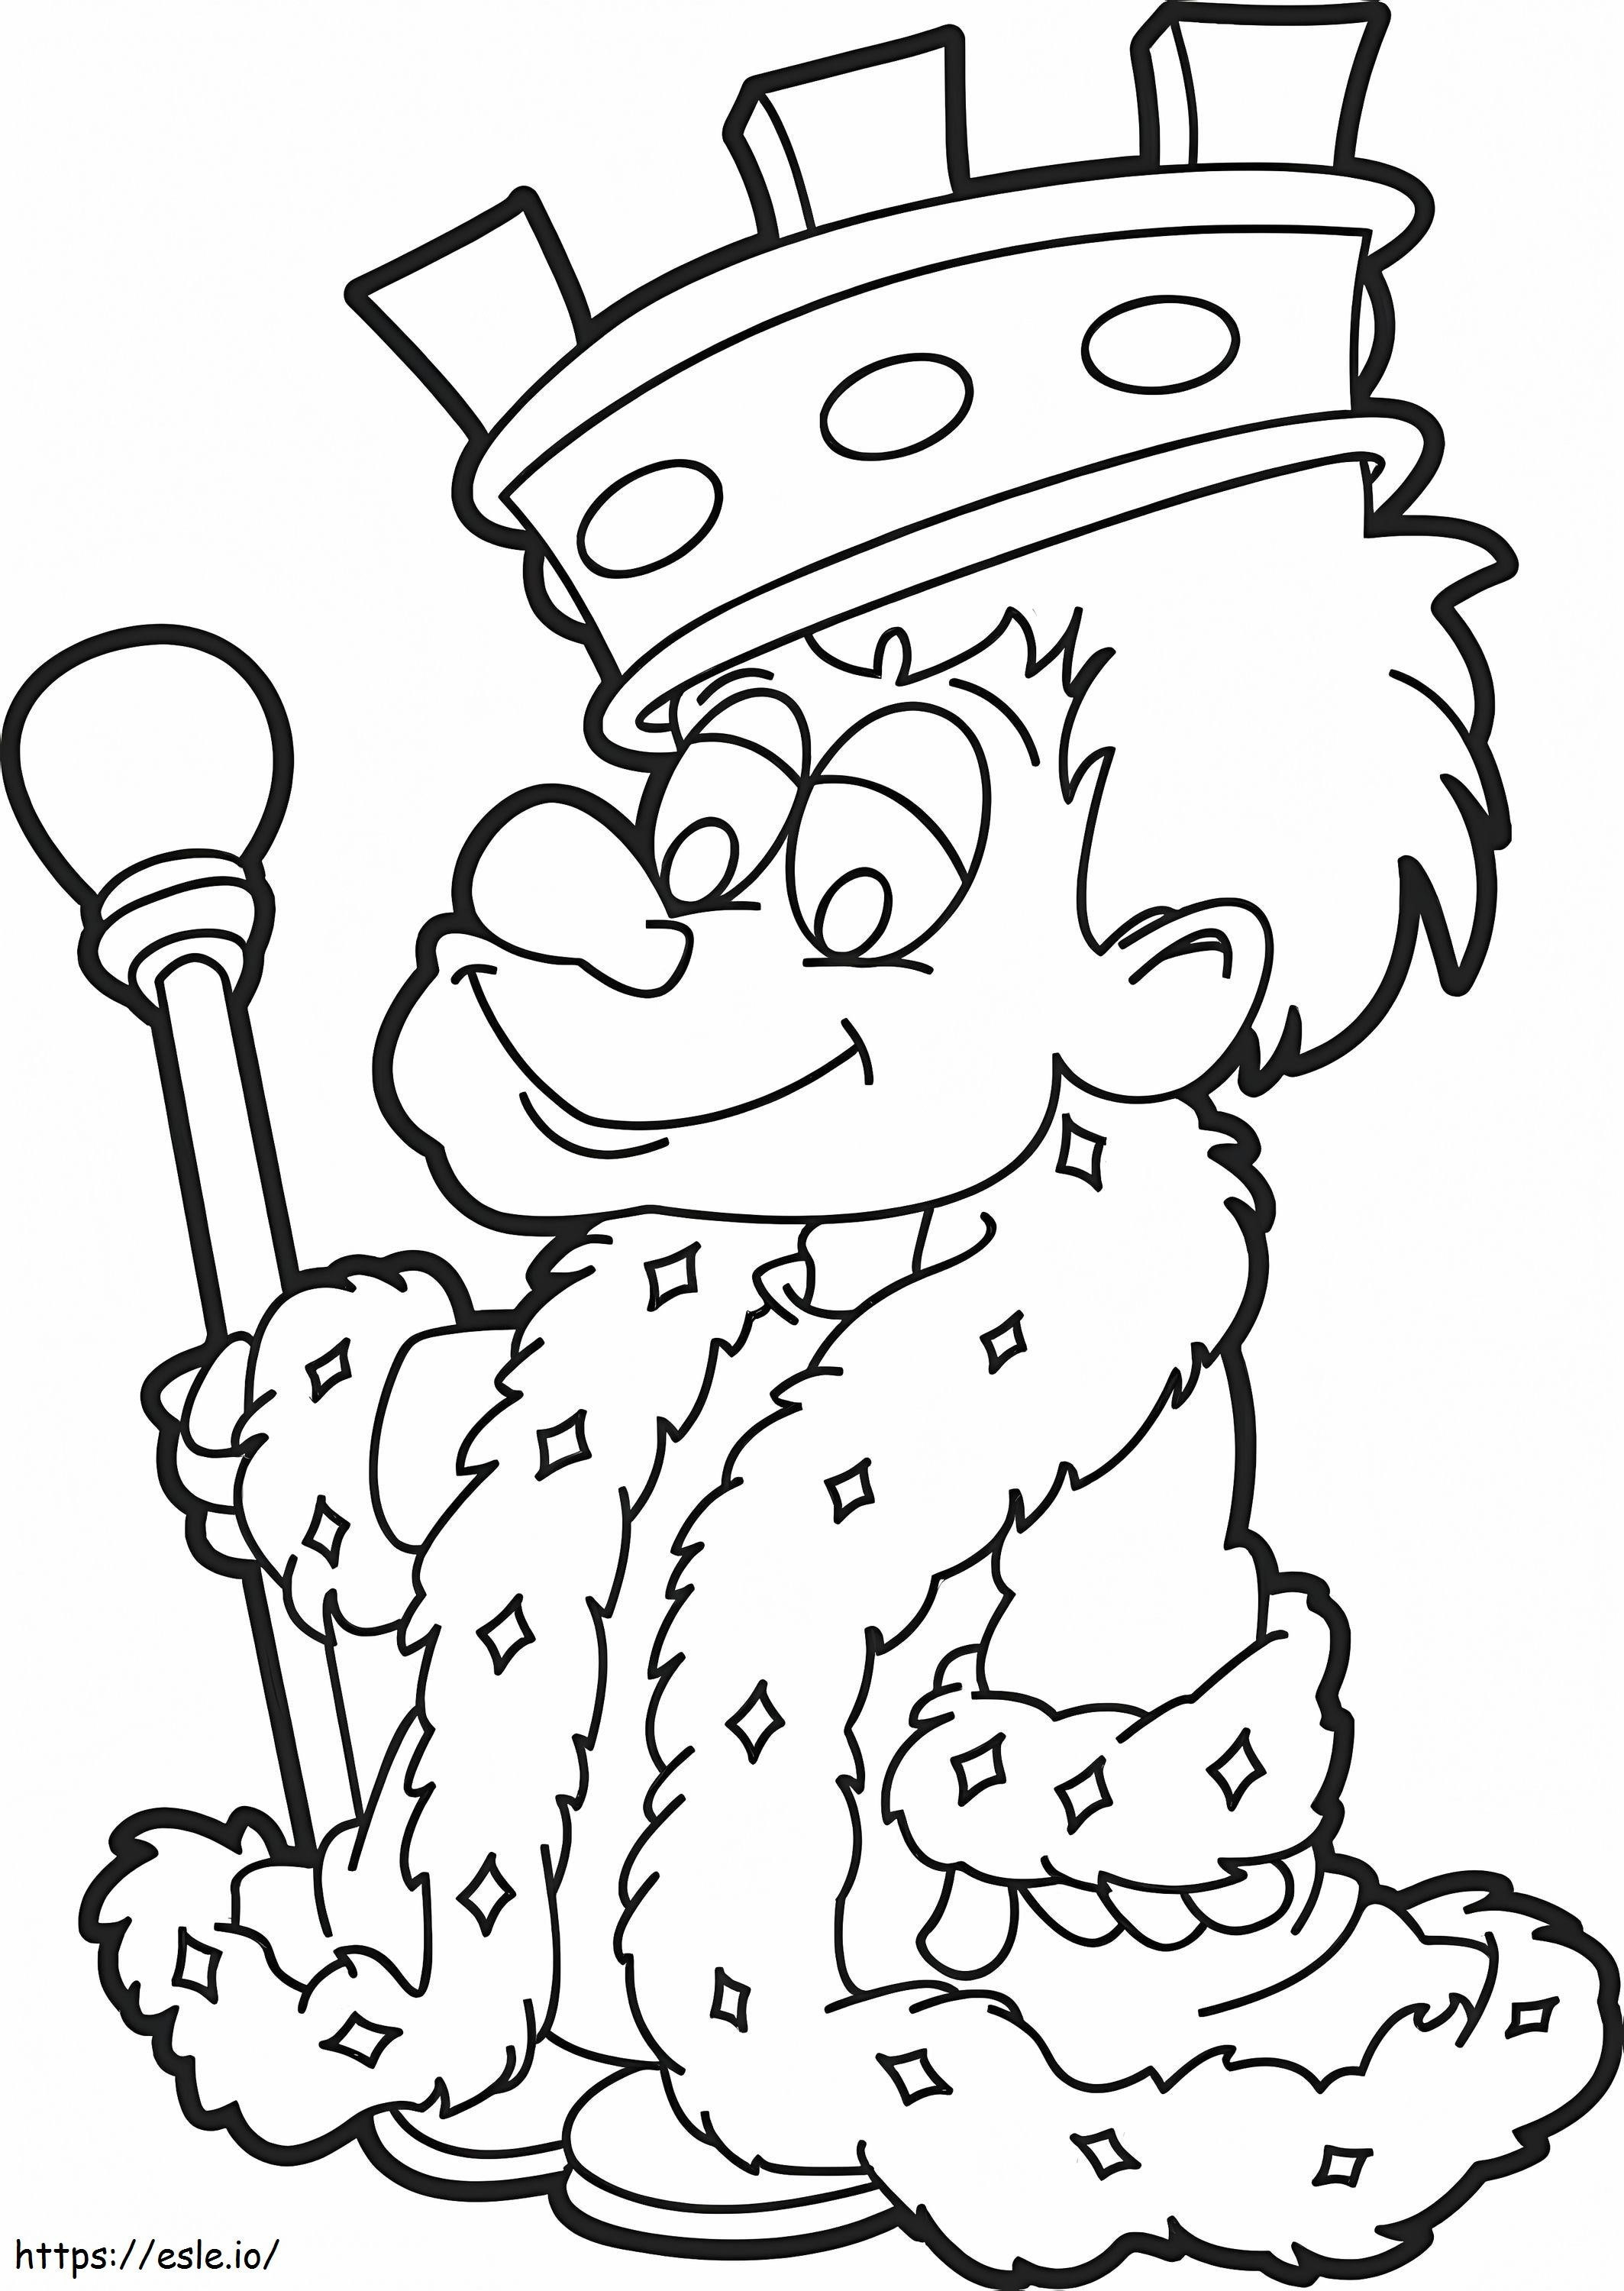 King Boy coloring page